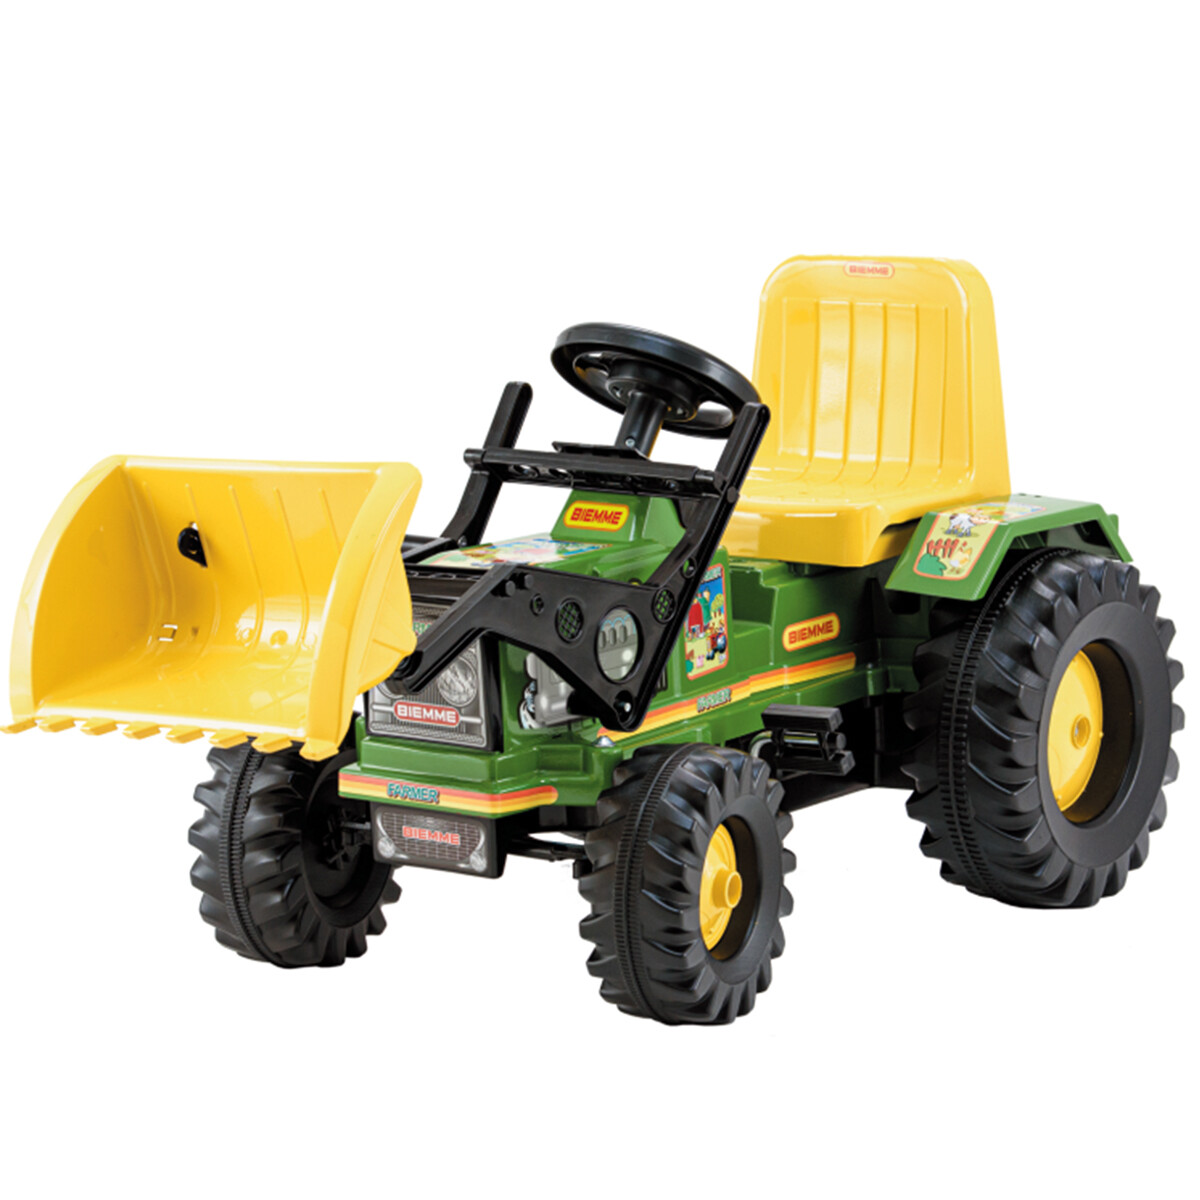 Auto Tractor Excavador A Pedal Infantil Hecho Brasil 